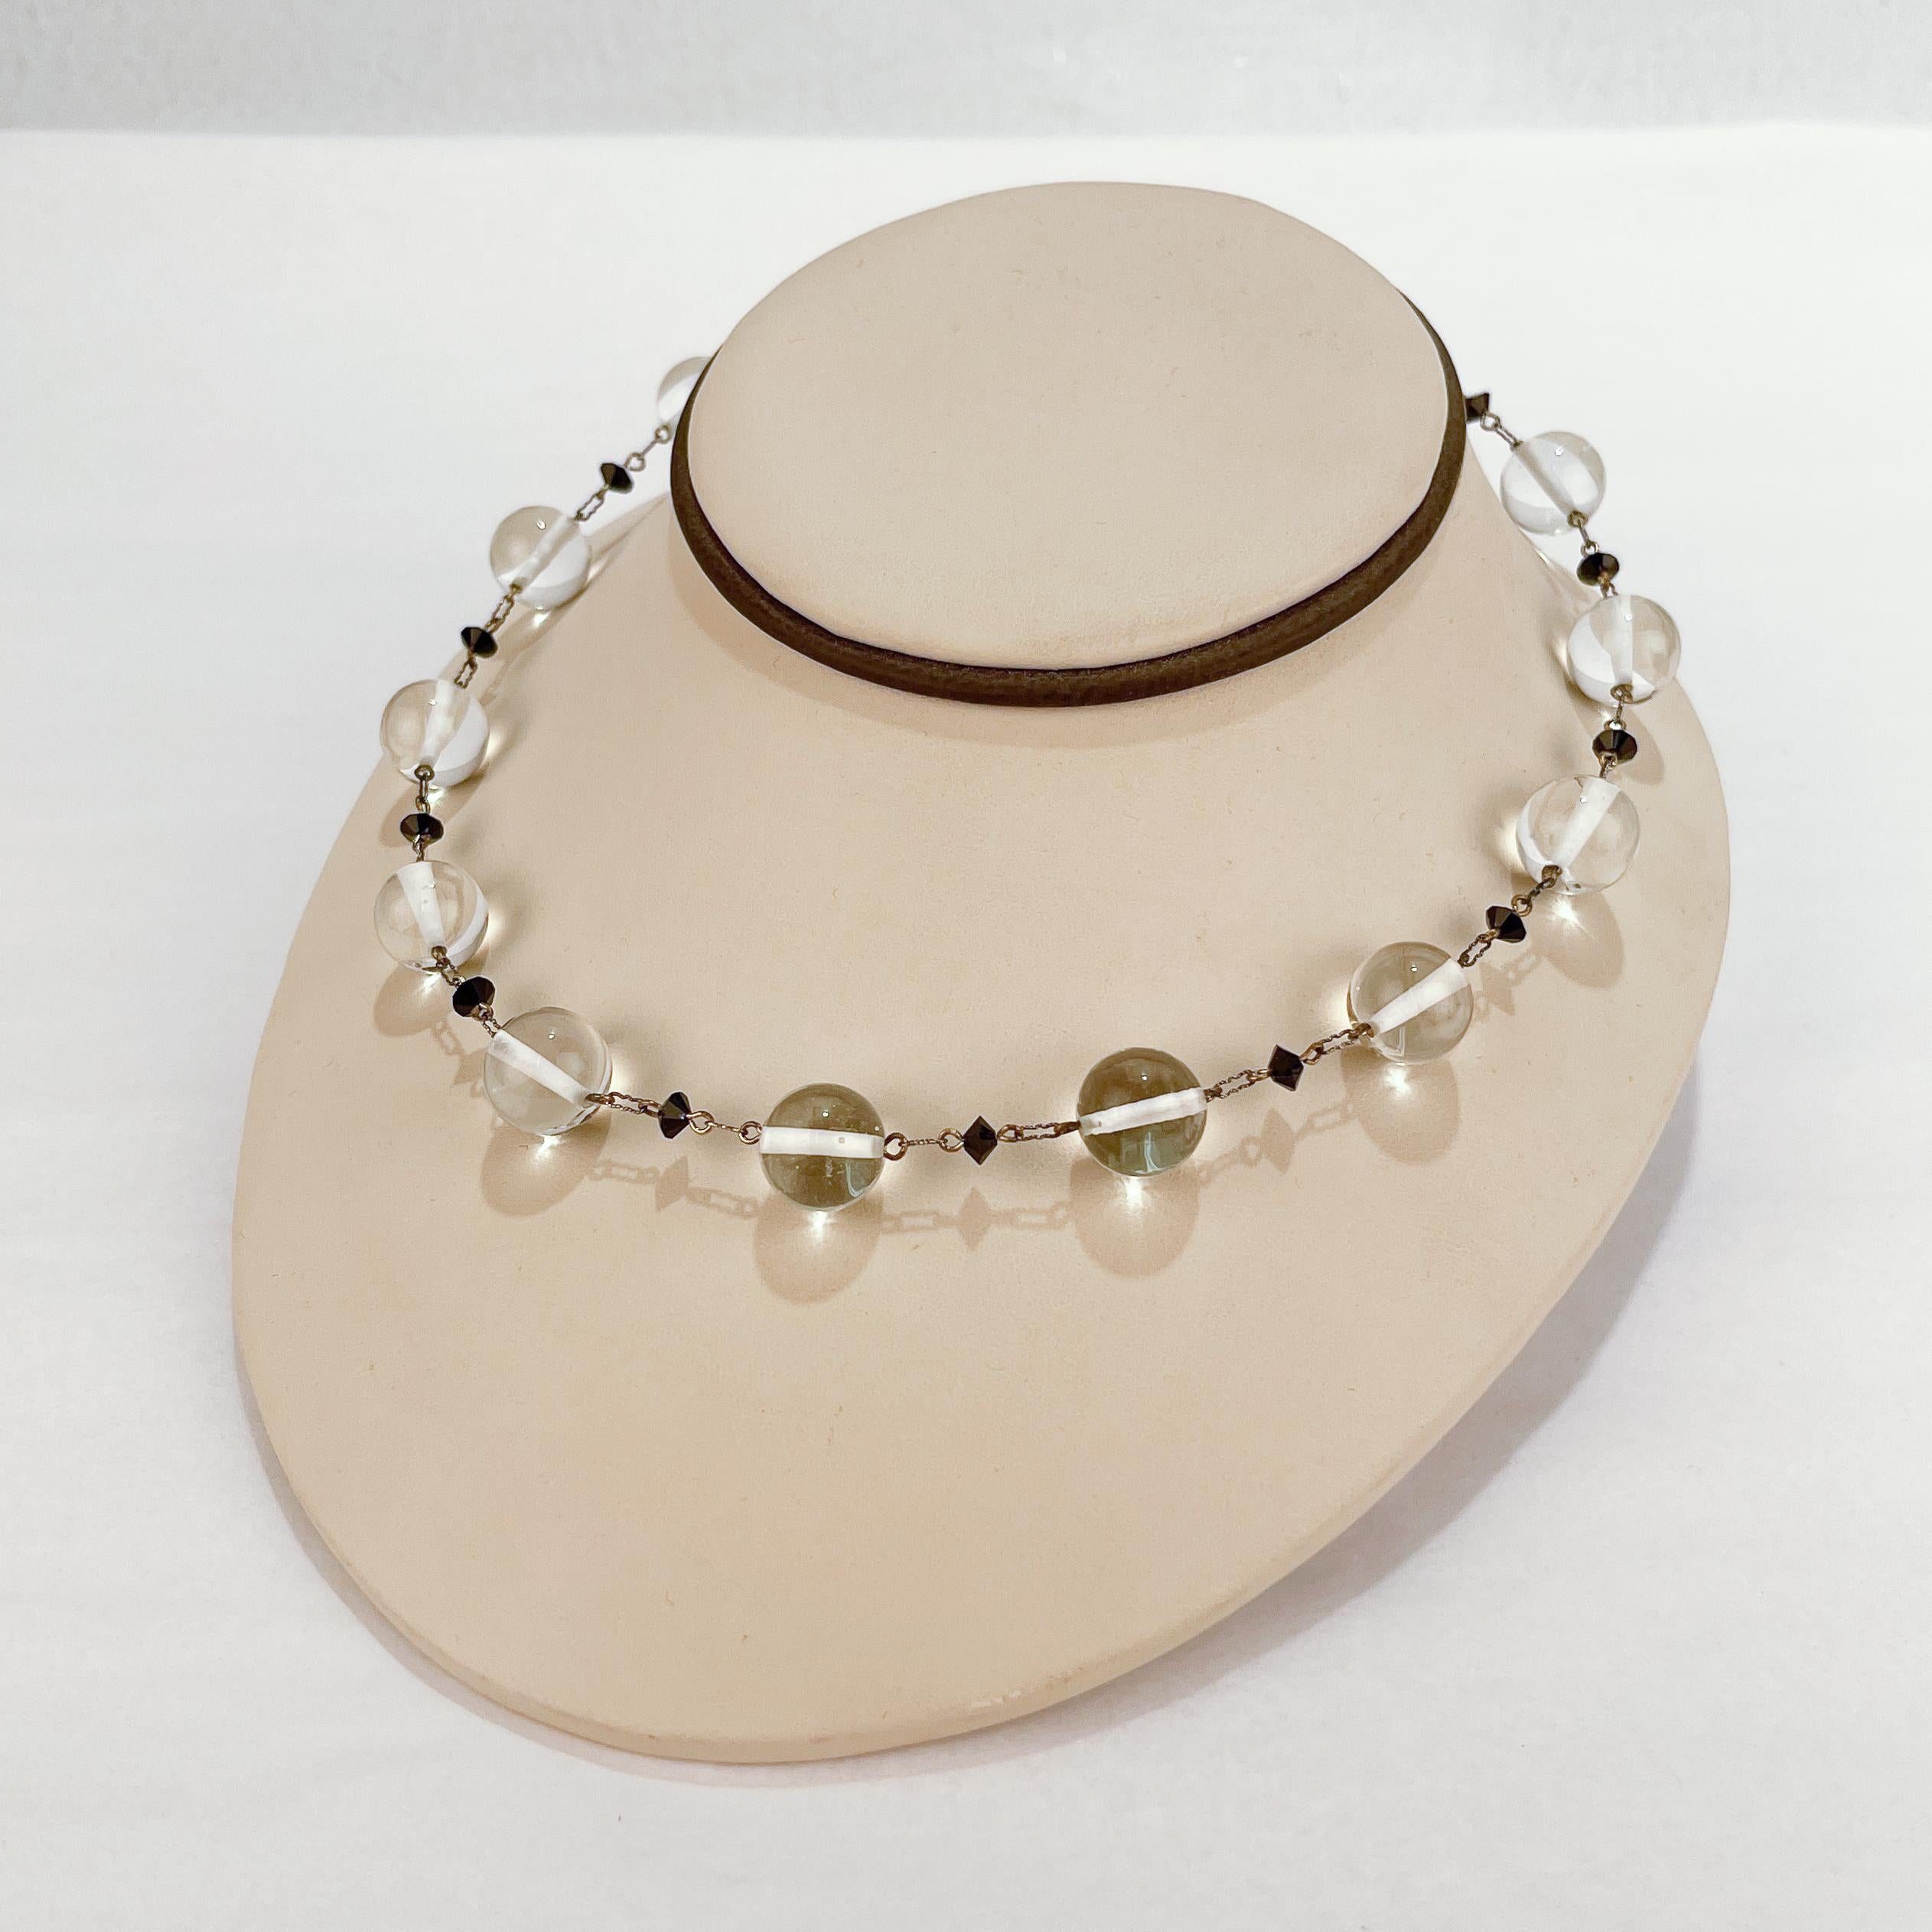 A very fine retro glass bead and sterling silver choker necklace.

With alternating clear 13mm and black faceted glass beads.

Each bead has a sterling bar riveted through its center and is connected to the next bead with a shape silver link.

Very